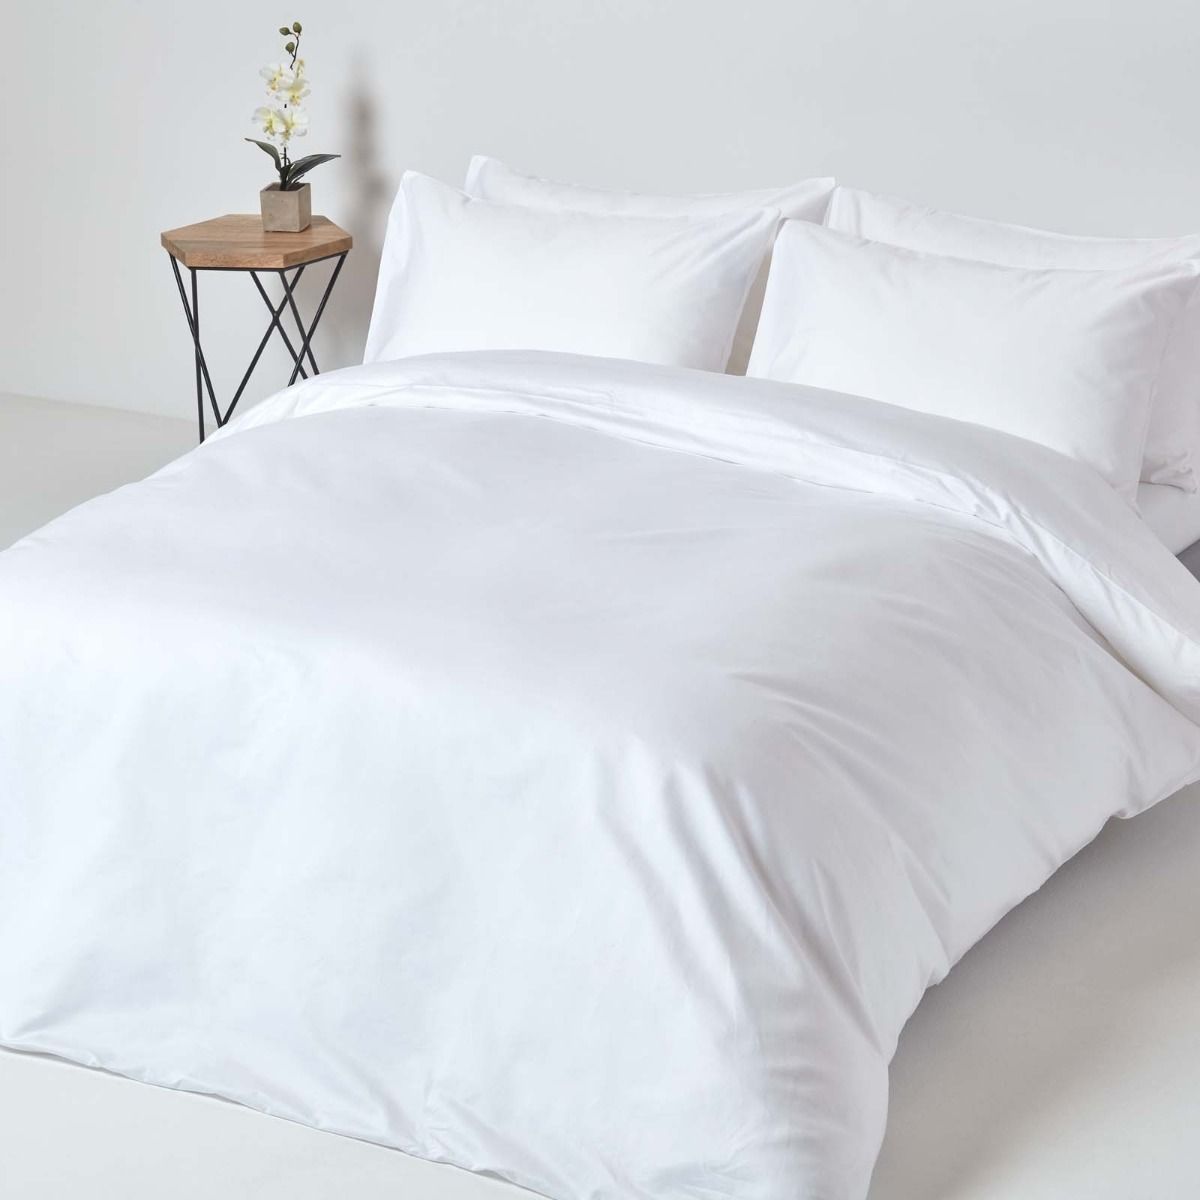 Kamas Duvet Cover Ruched Pattern 3 Pieces Queen/Full White Duvet Cover Set 100% Egyptian Cotton 600 Thread Count with Zipper & Corner Ties Luxurious Quality